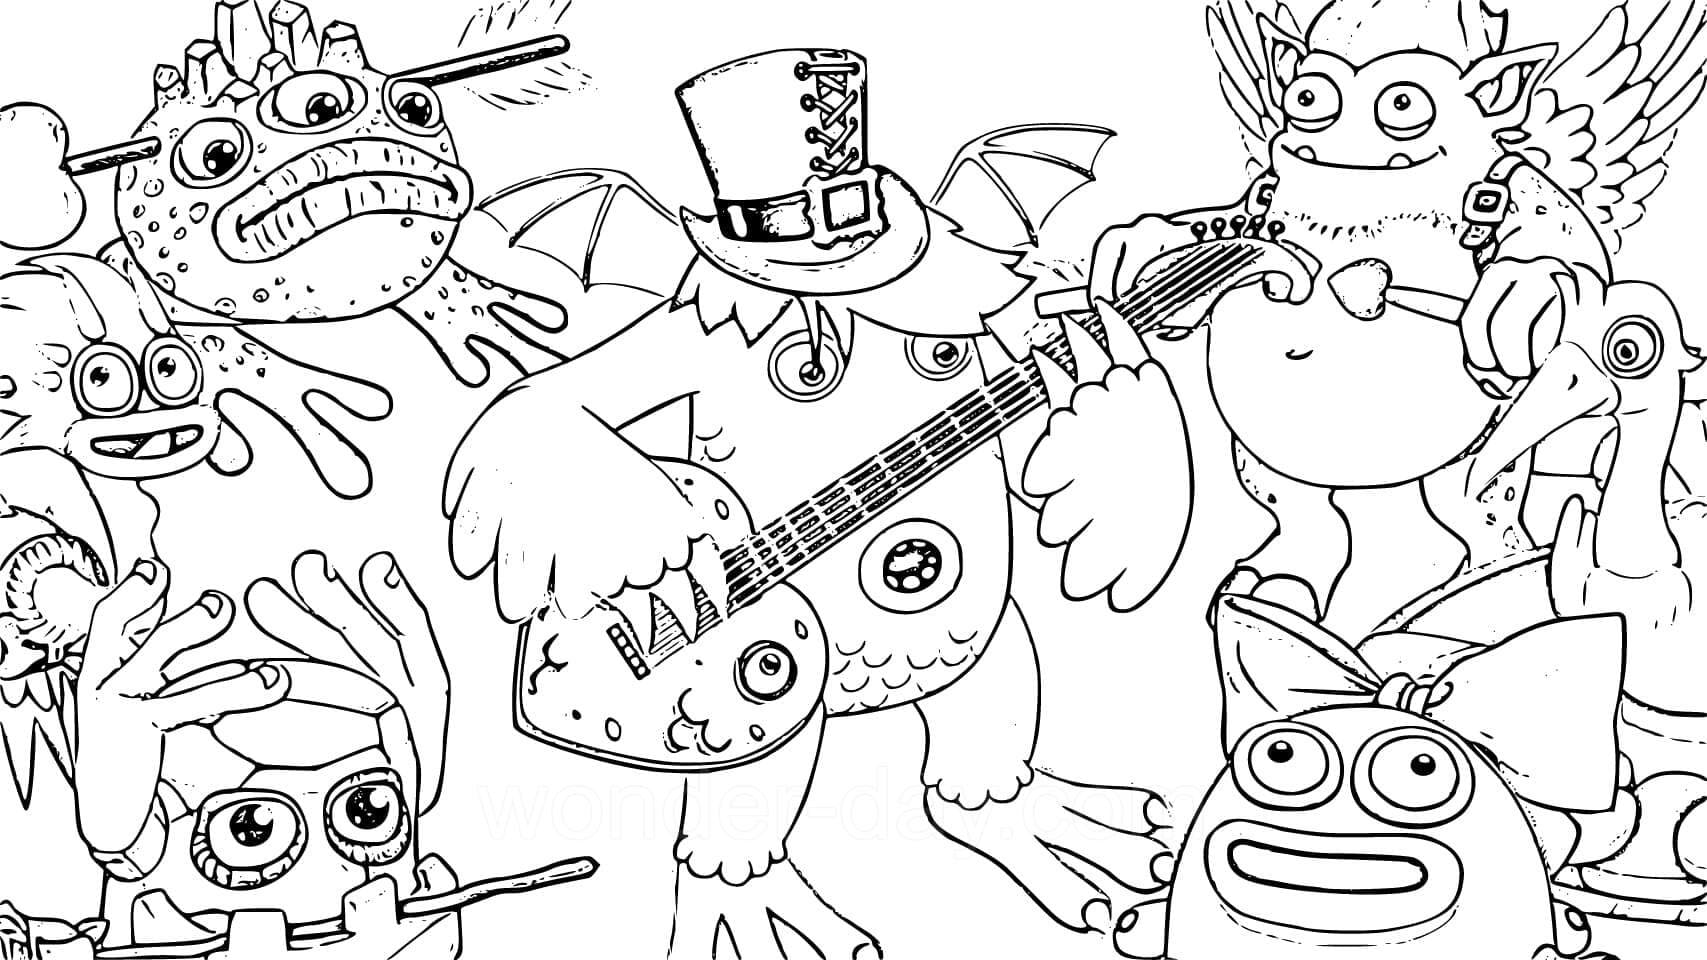 Printable My Singing Monsters coloring page - Download, Print or Color ...